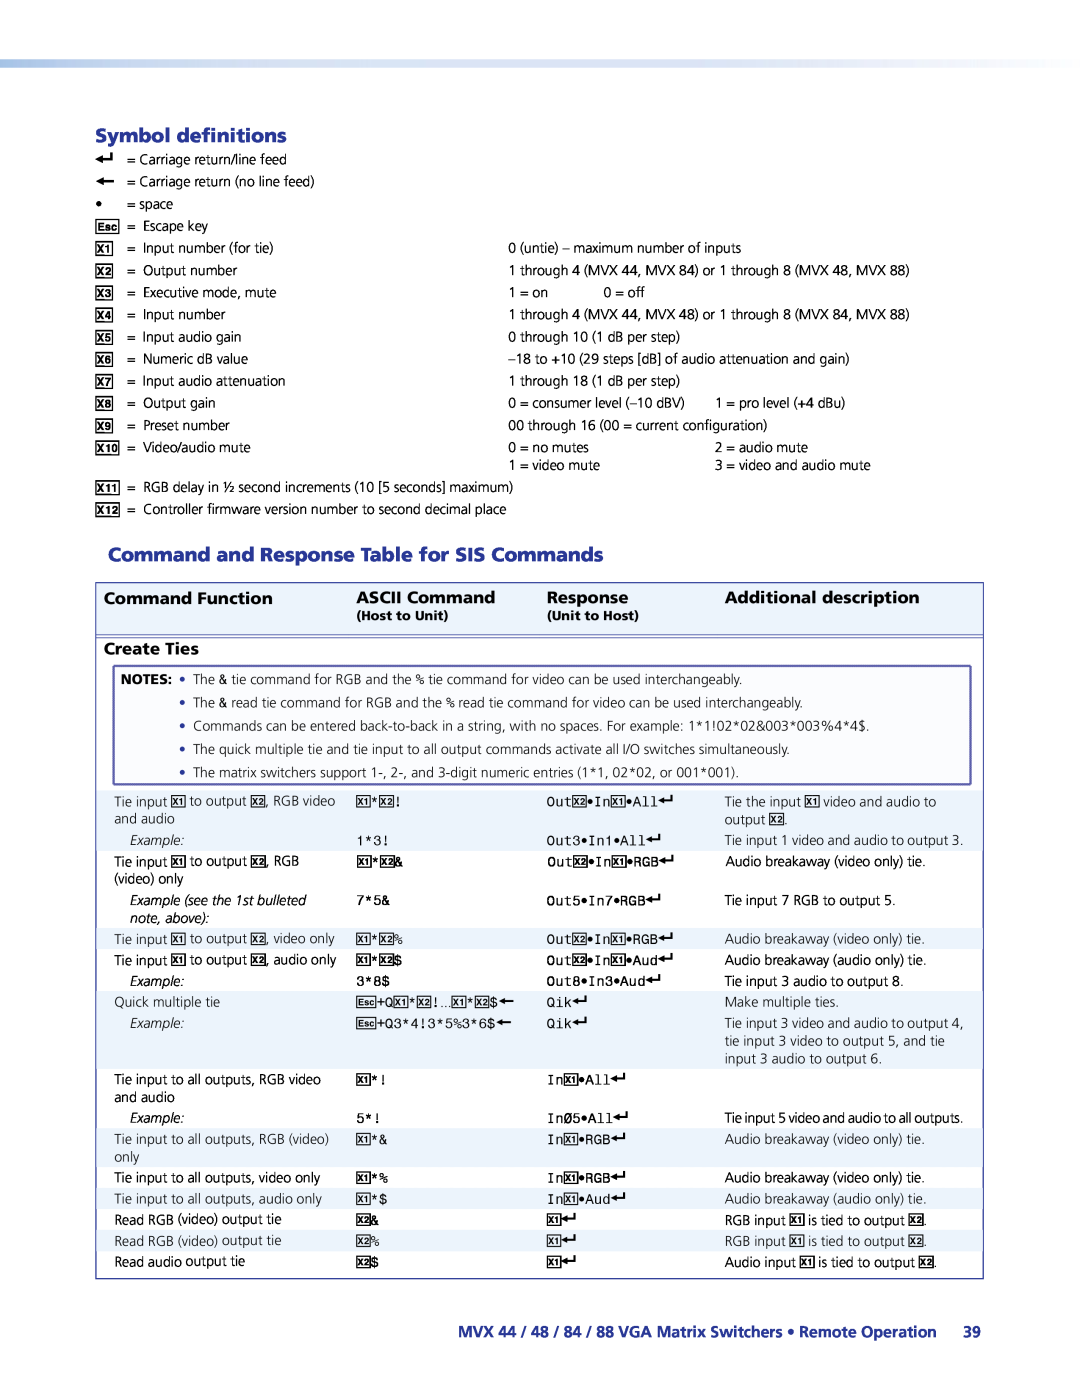 Extron electronic MVX 44 Symbol definitions, Command and Response Table for SIS Commands, Command Function, ASCII Command 